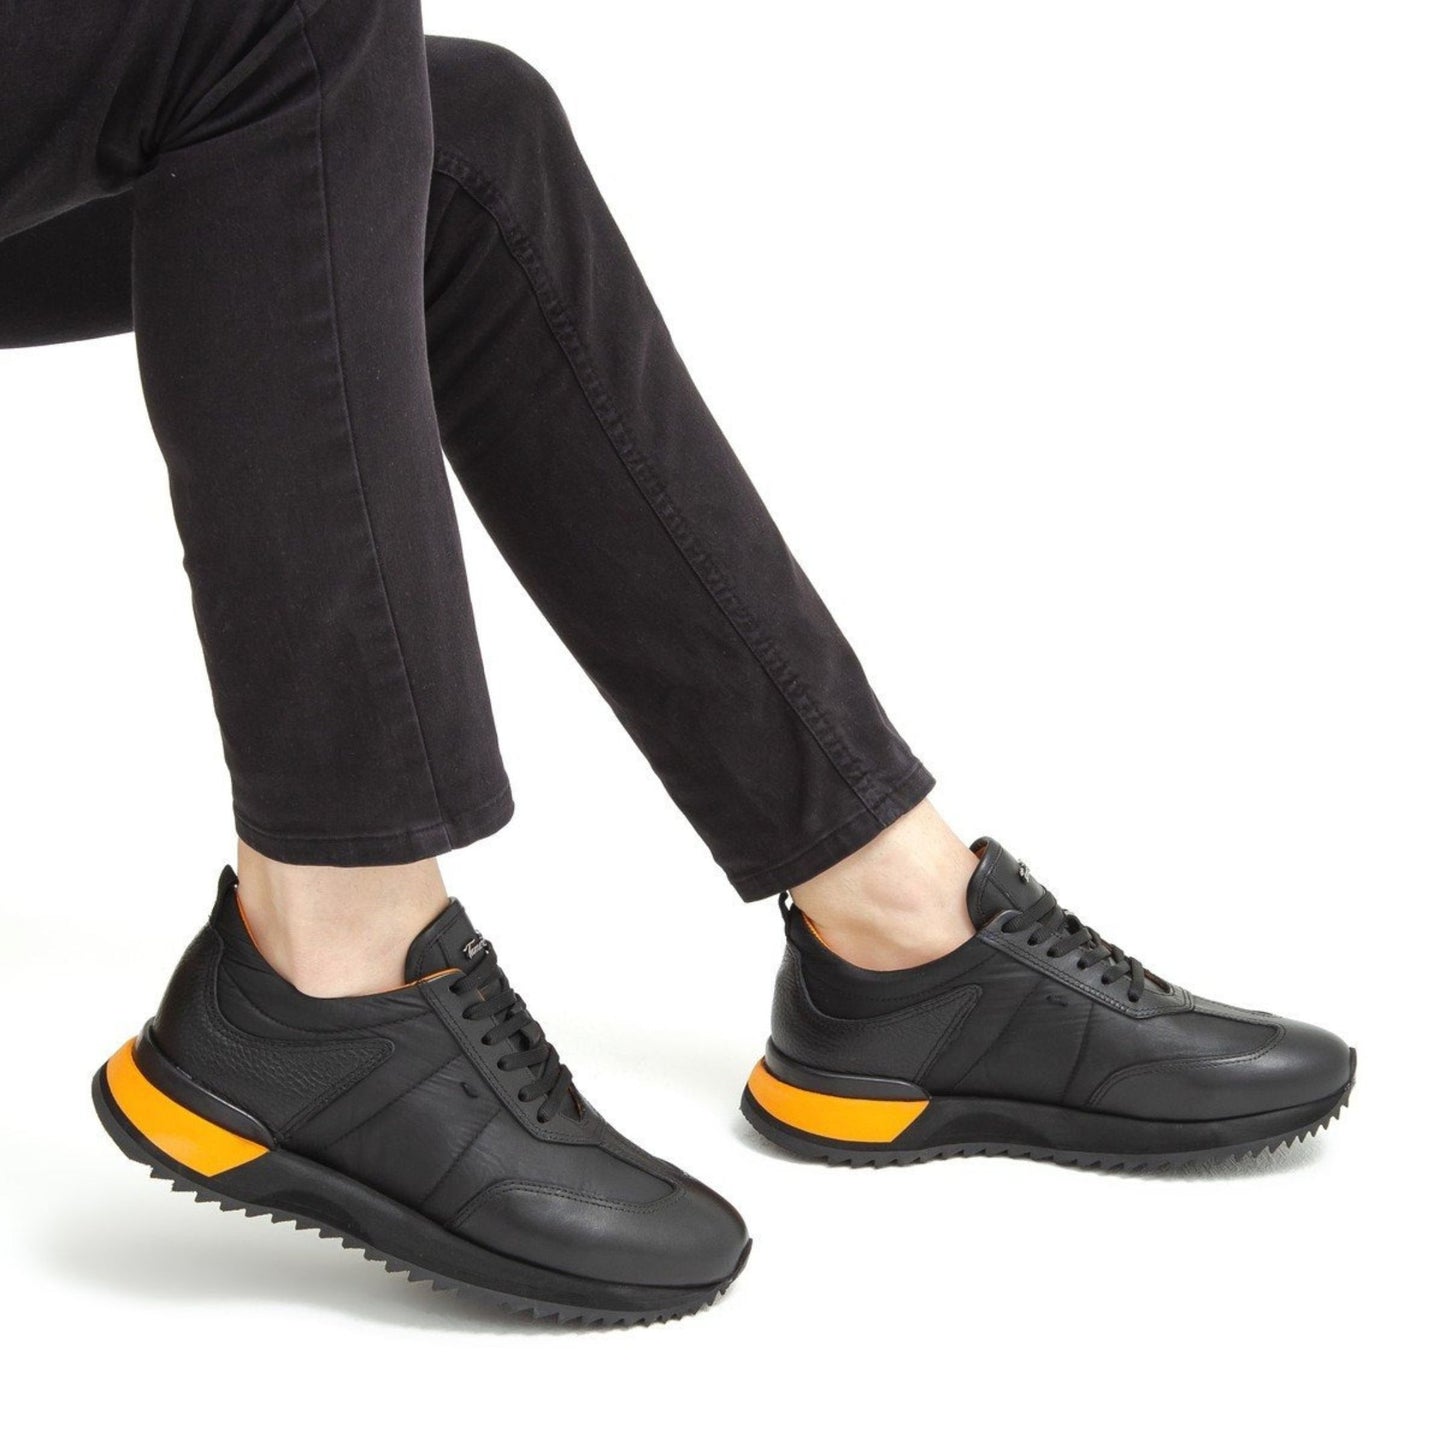 Madasat Black Casual Shoes - 587 |